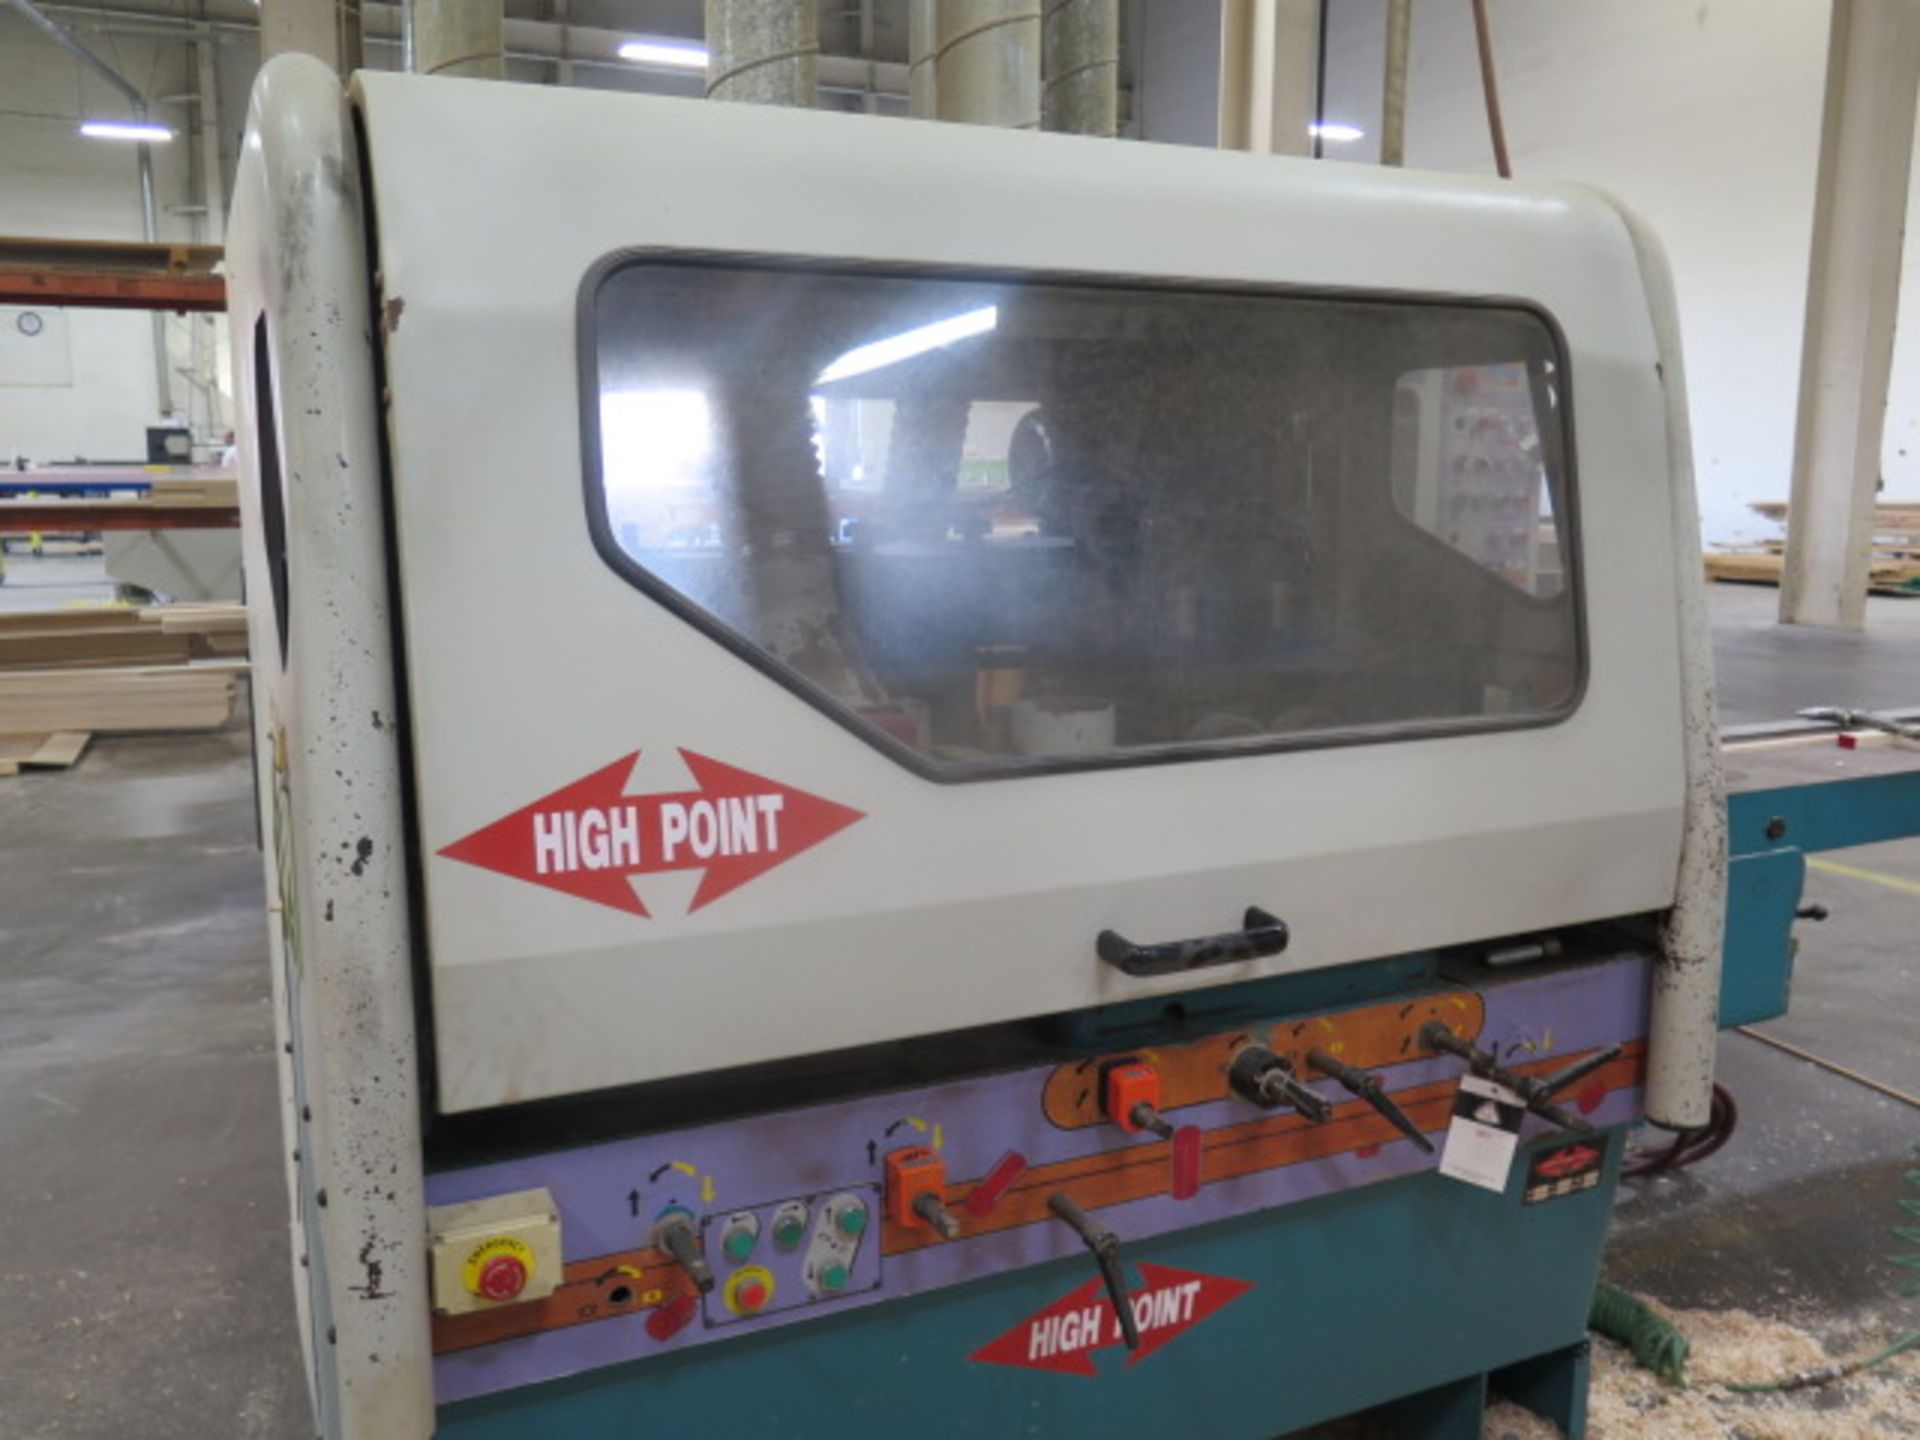 High Point CM-555 Multi-Head Moulding Machine (NEEDS REPAIR) s/n 02A0254 w/ High Point, SOLD AS IS - Image 2 of 15